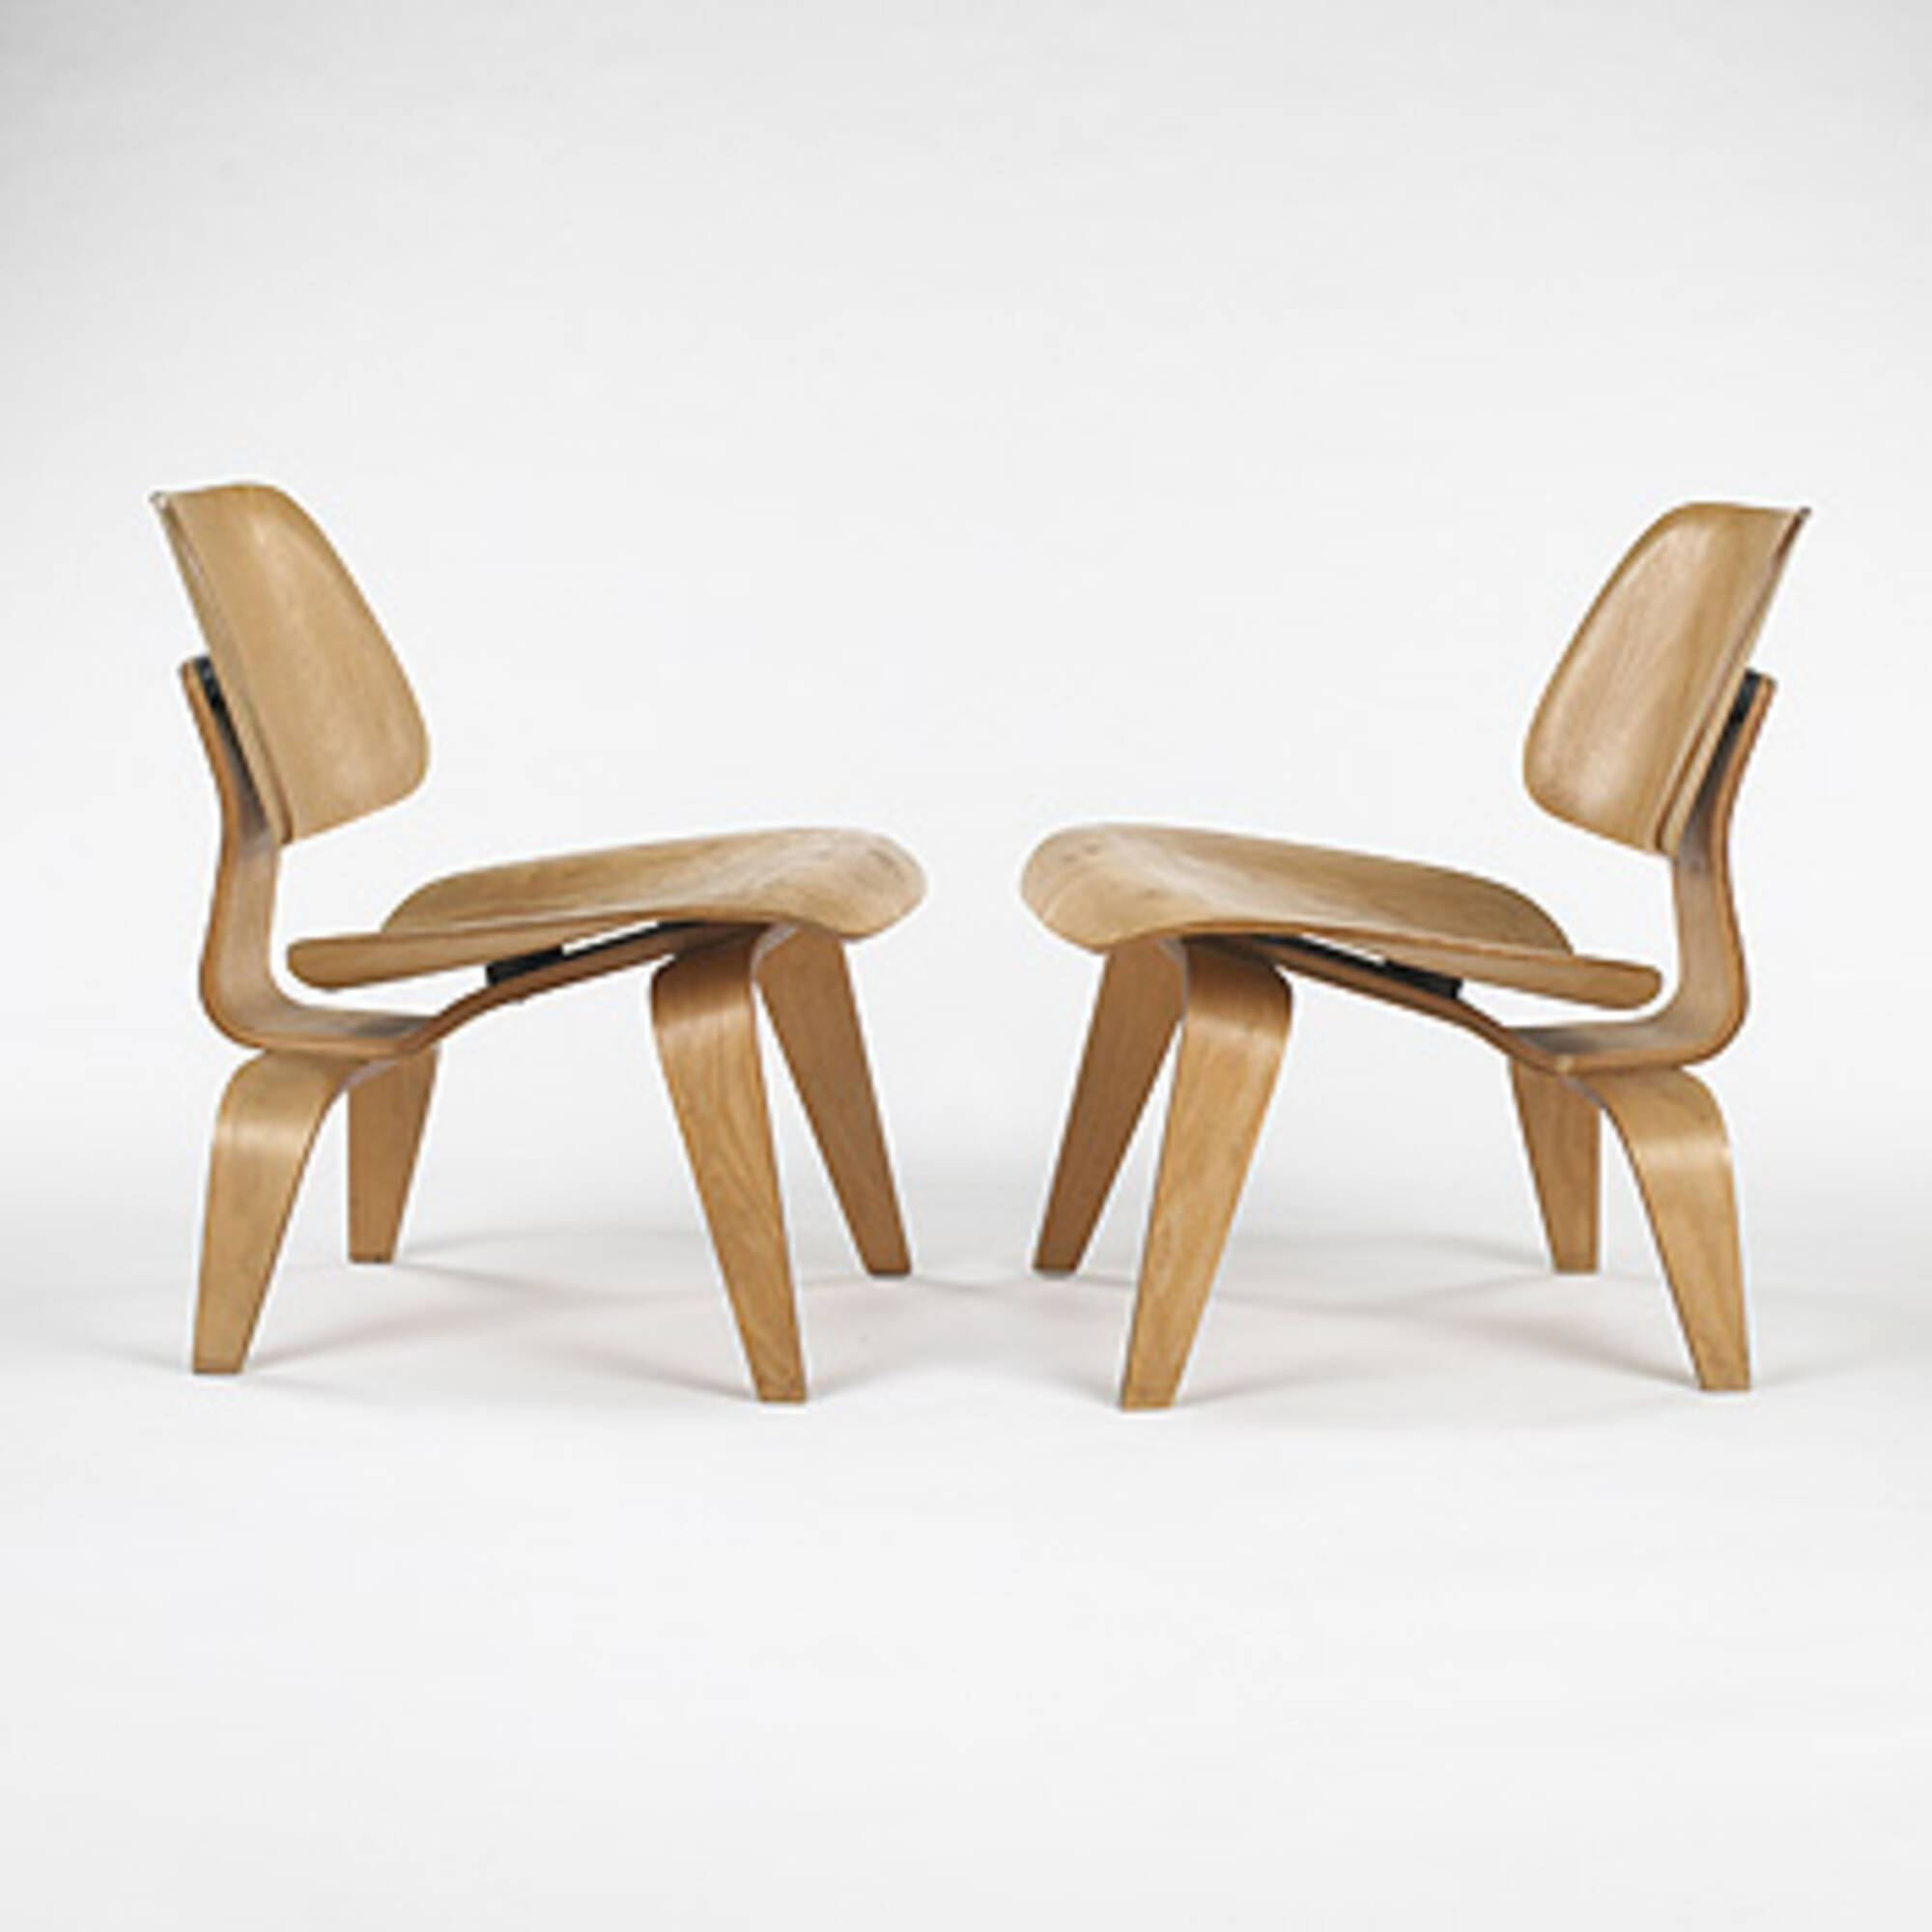 332 0 Modernist 20th Century May 2005 Charles And Ray Eames Lcw Pair  Wright Auction ?t=1517494291